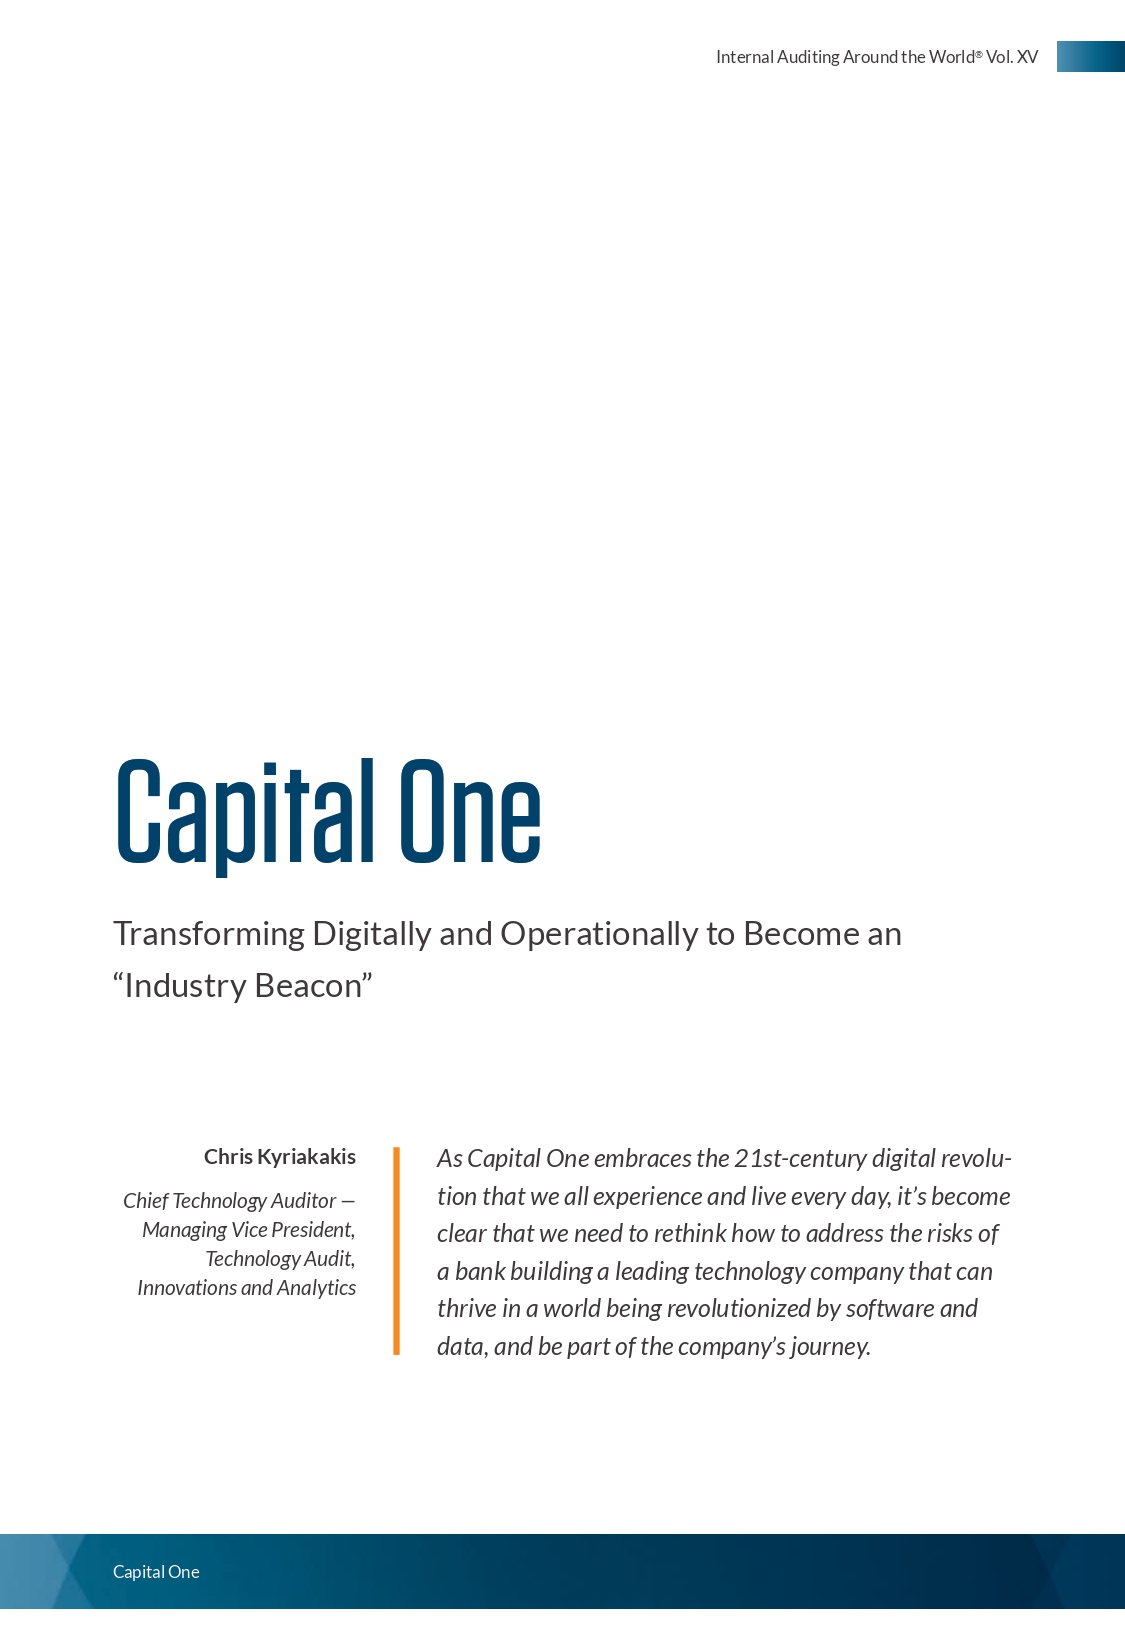 Capital One: Transforming Digitally and Operationally to Become an ‘‘Industry Beacon’’